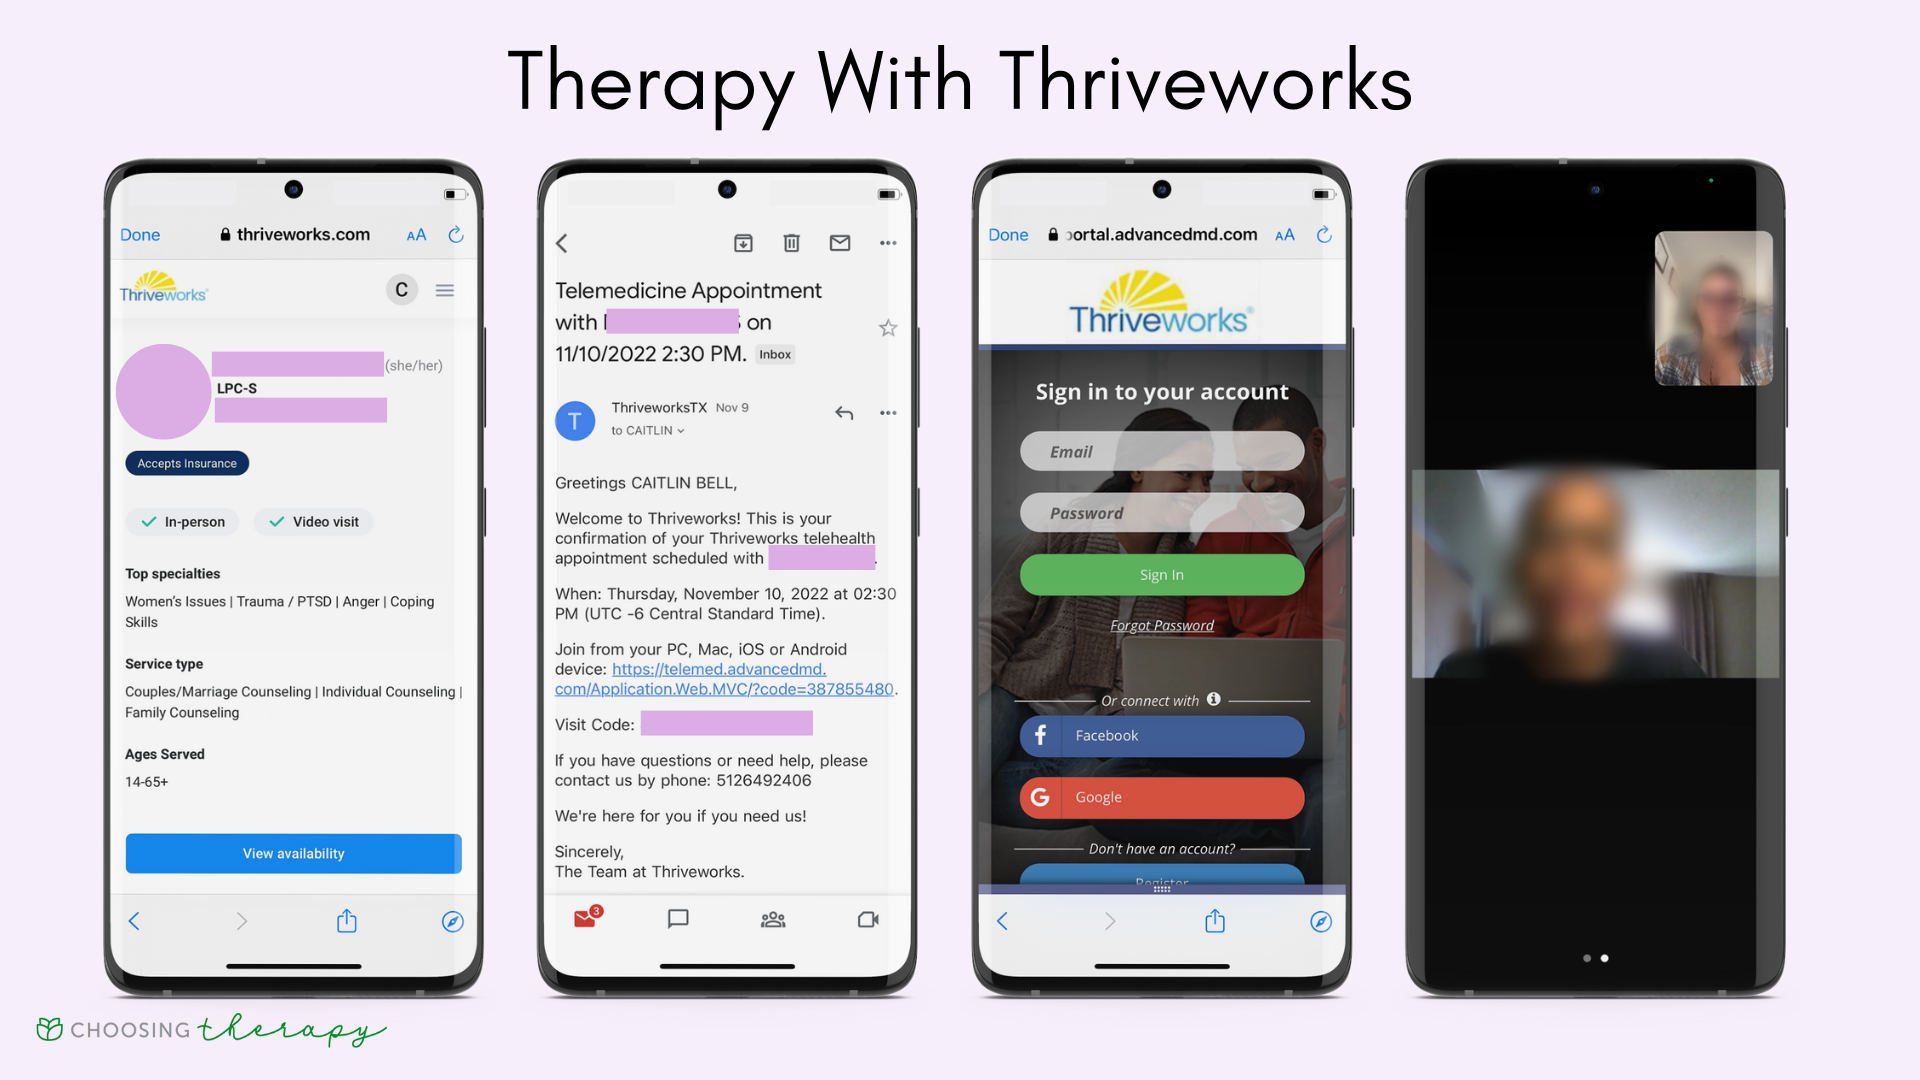 Thriveworks Review 2022 - Image of how to attend a therapy sessions with Thriveworks